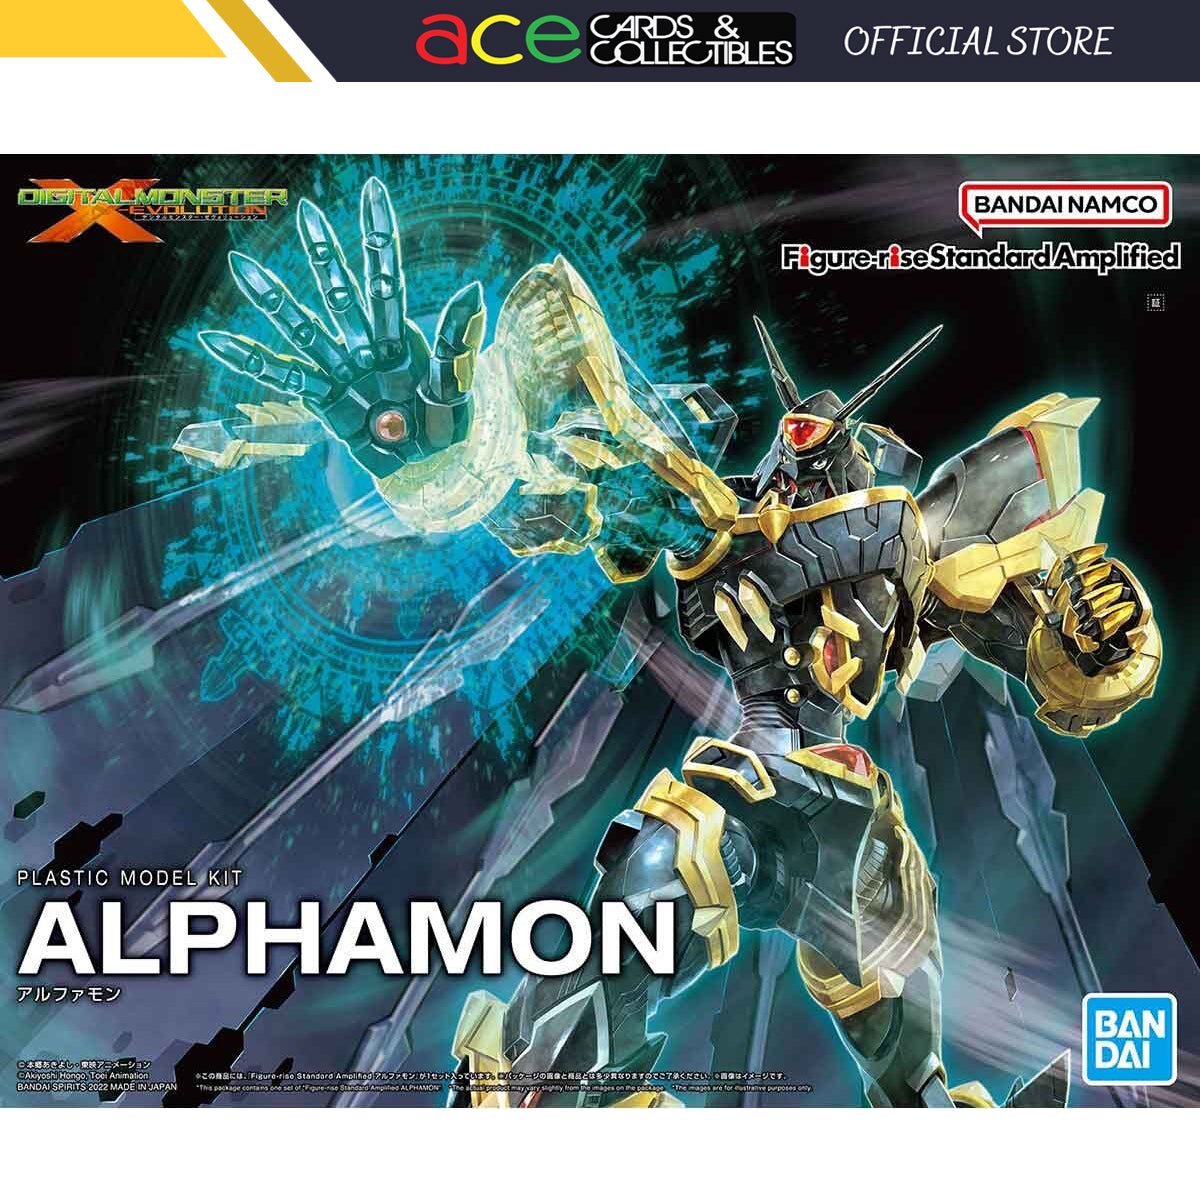 Digimon Figure-rise Standard Amplified "Alphamon"-Bandai-Ace Cards & Collectibles